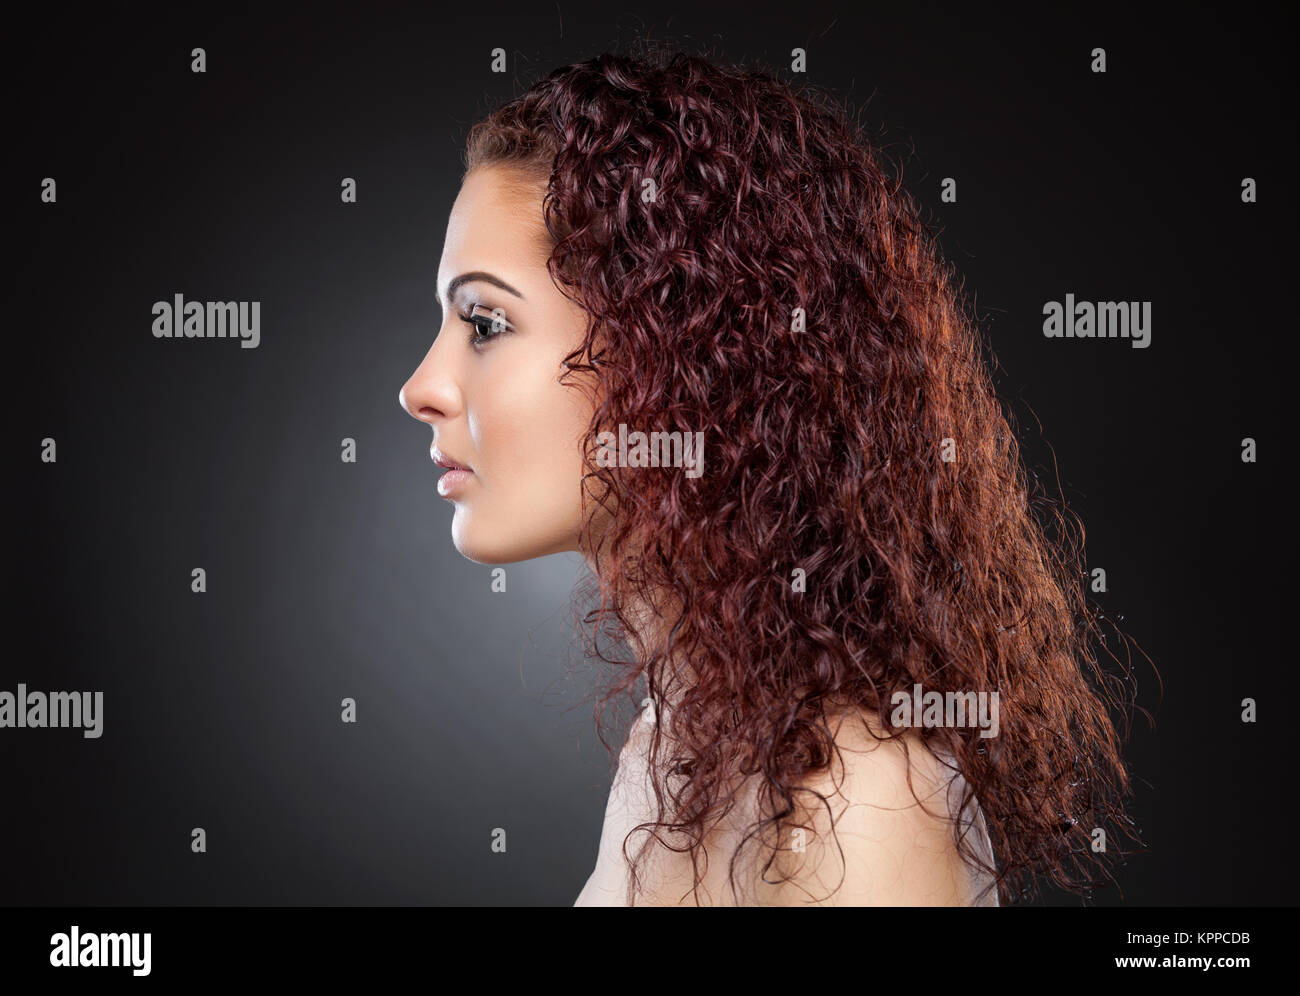 Beautiful woman with red curly hair Stock Photo - Alamy